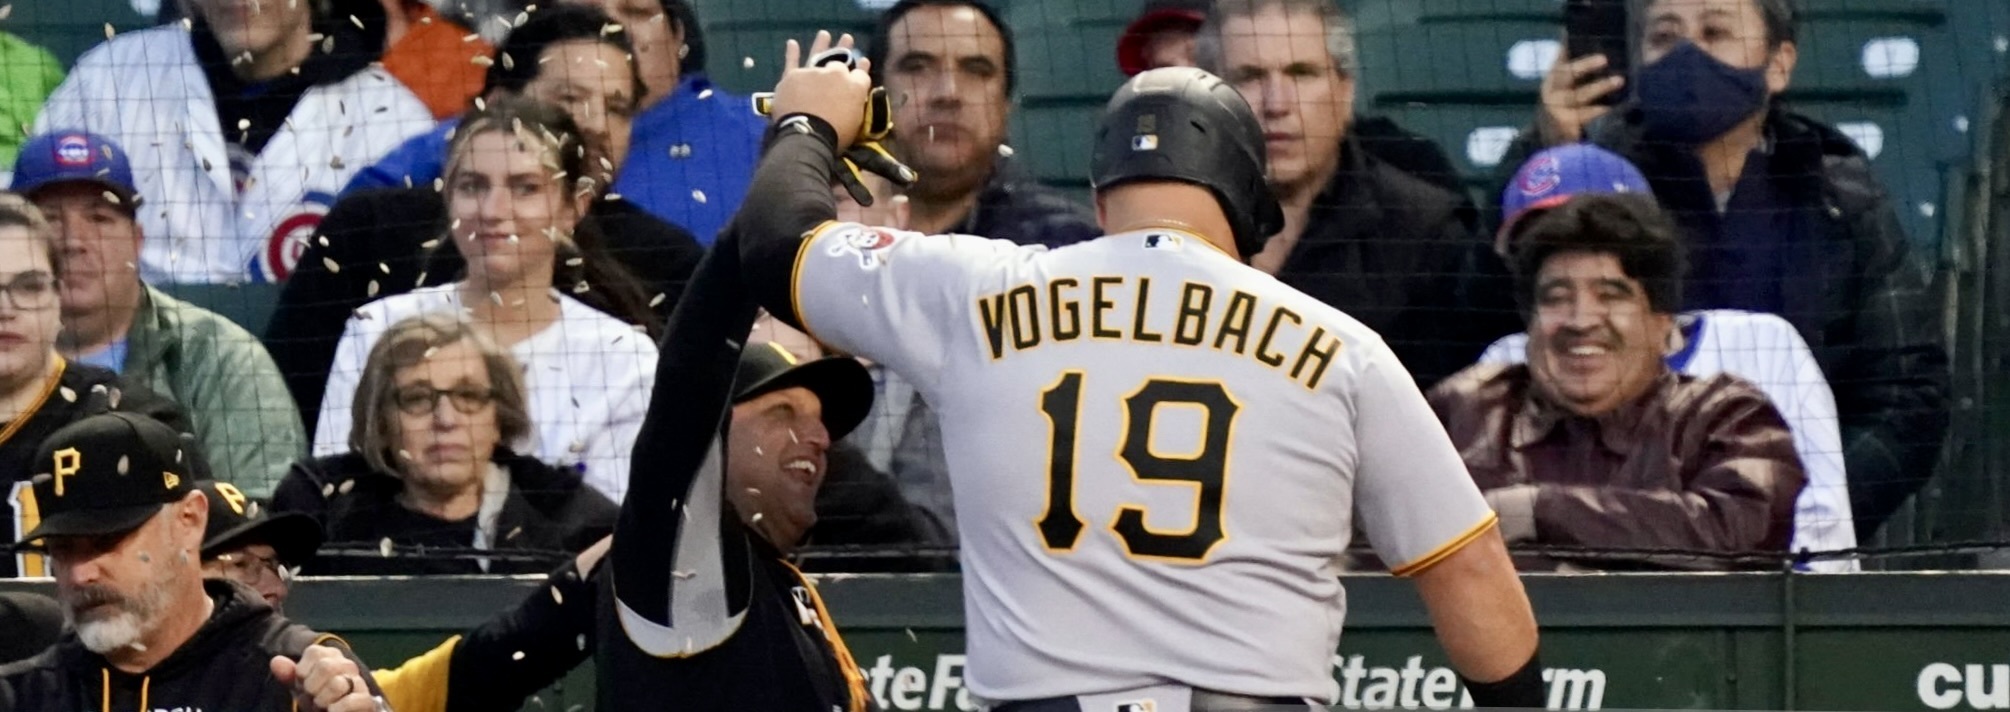 Pirates sign 1B/DH Daniel Vogelbach, righty reliever Heath Hembree to  1-year contracts